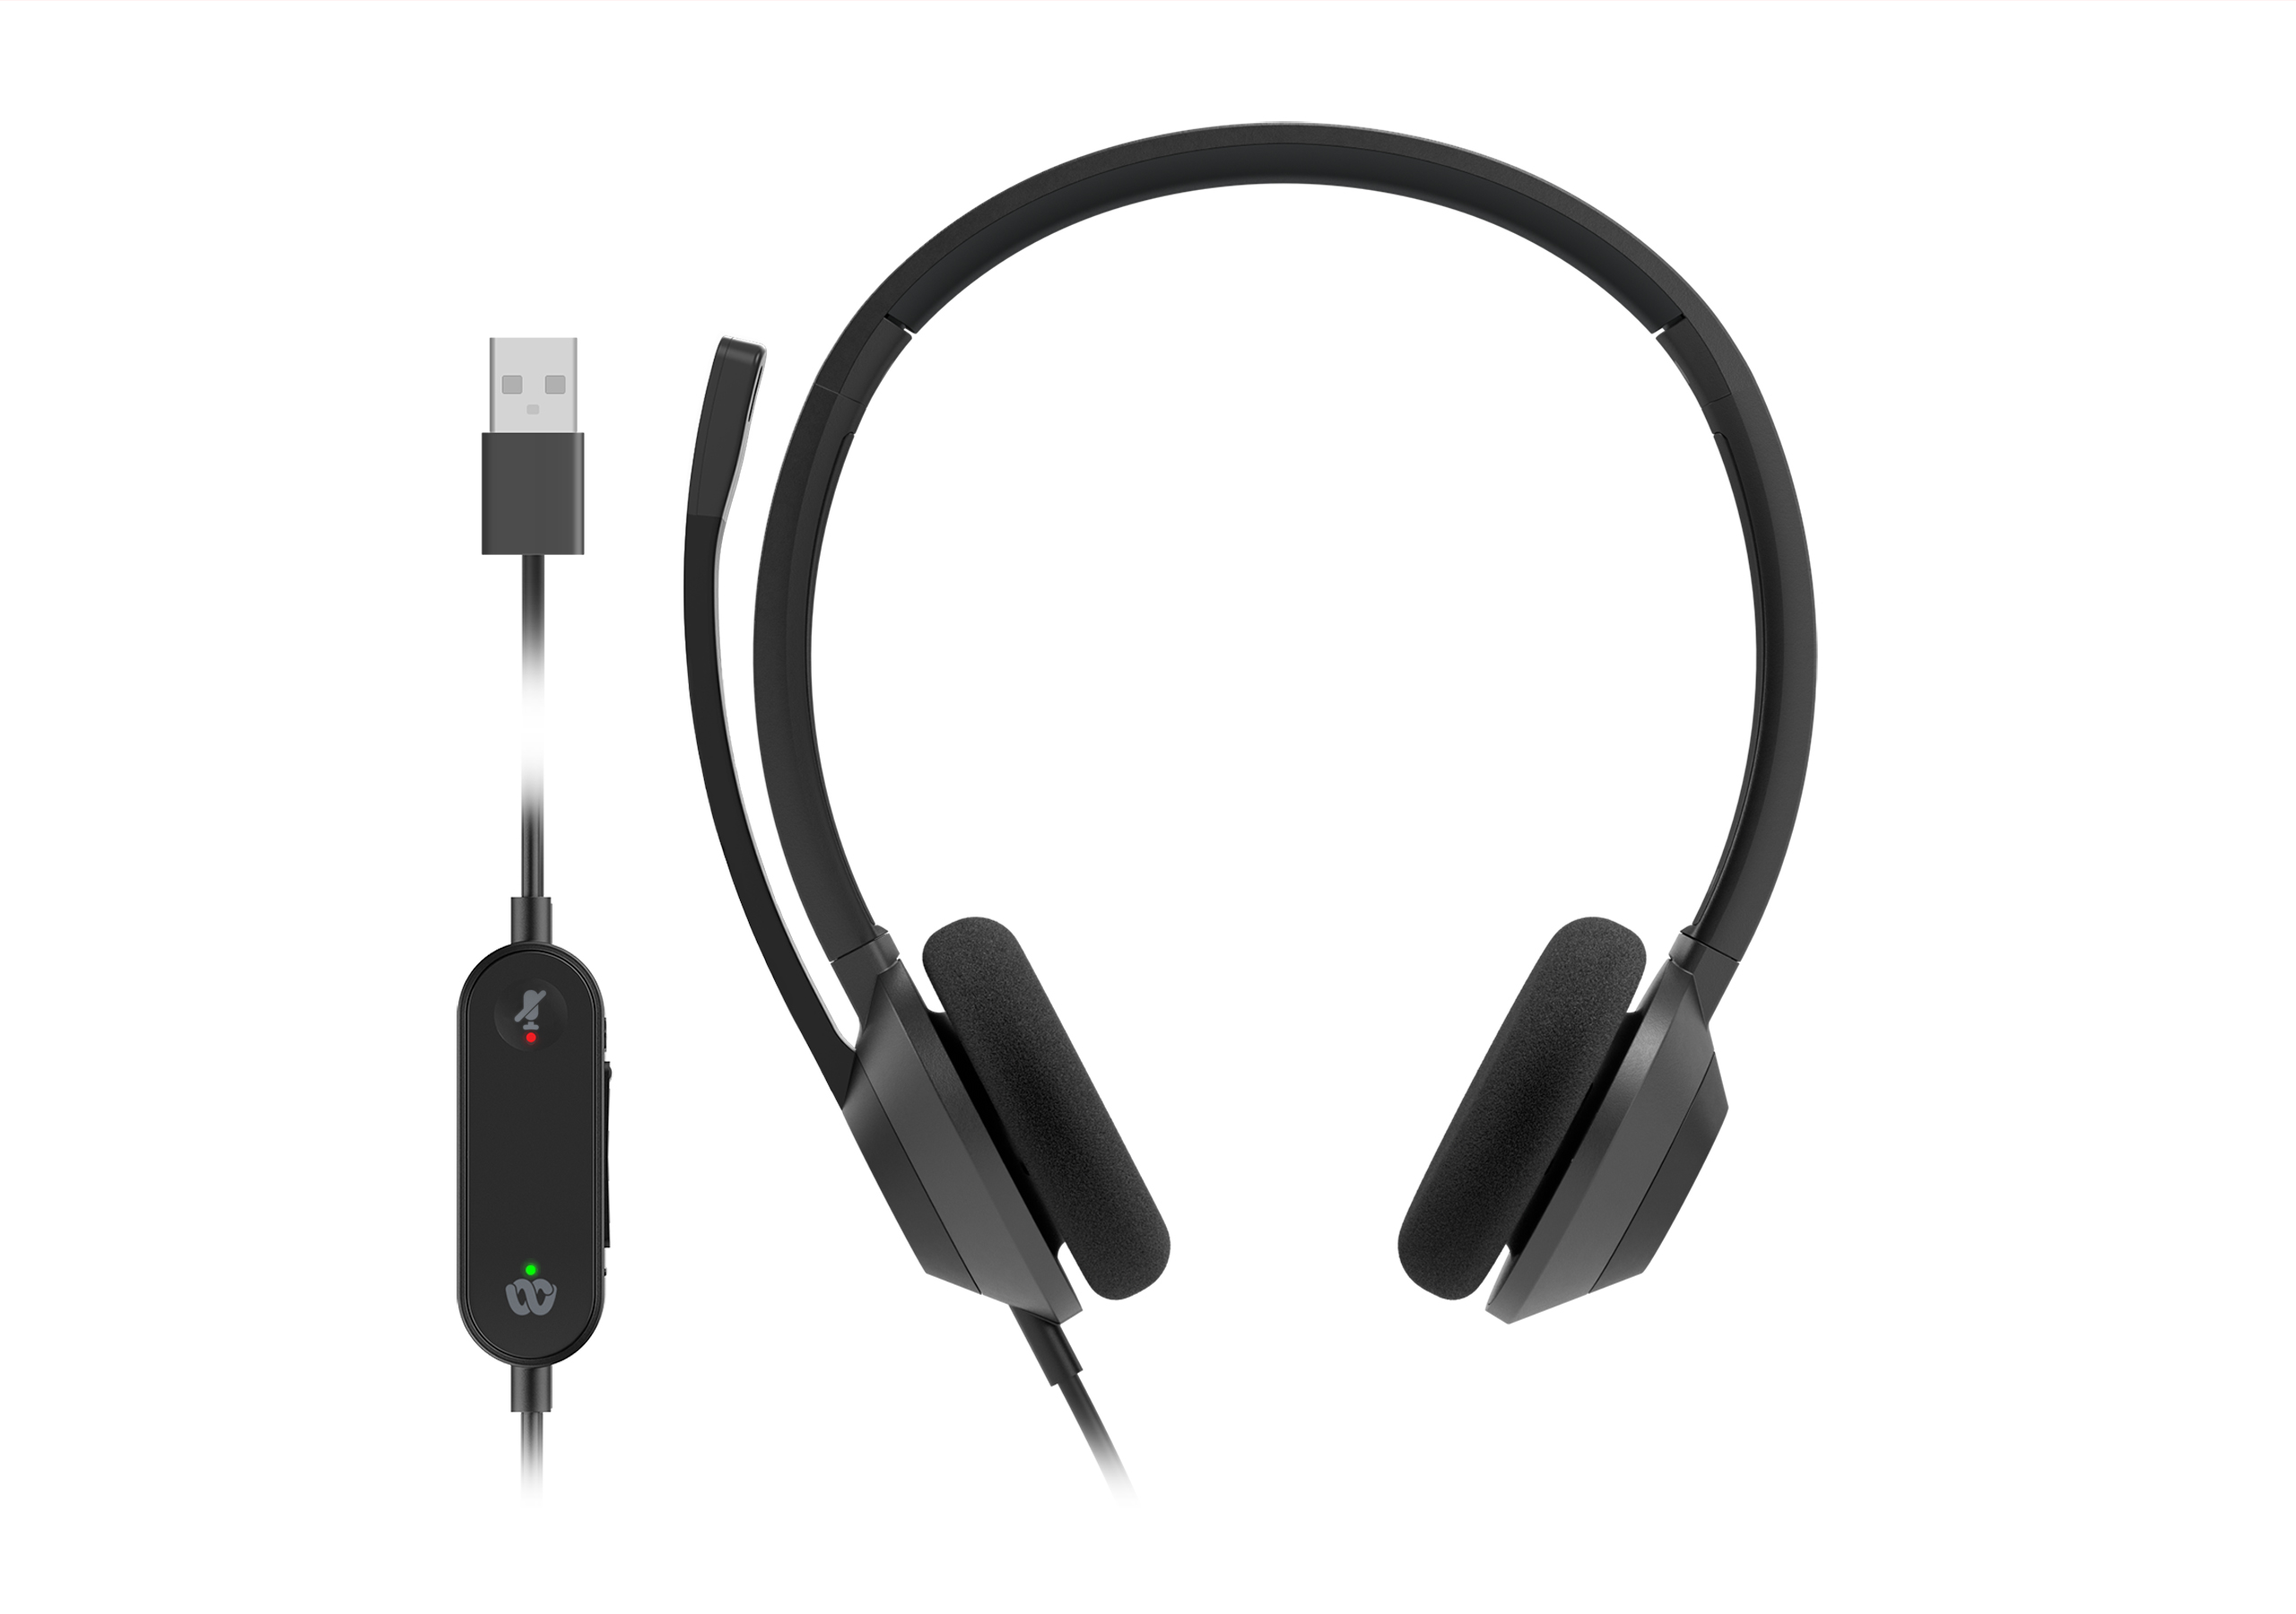 Cisco+Headset+322+Wired+Dual+On-Ear+Carbon+Black+USB-A+HSW322CUSB